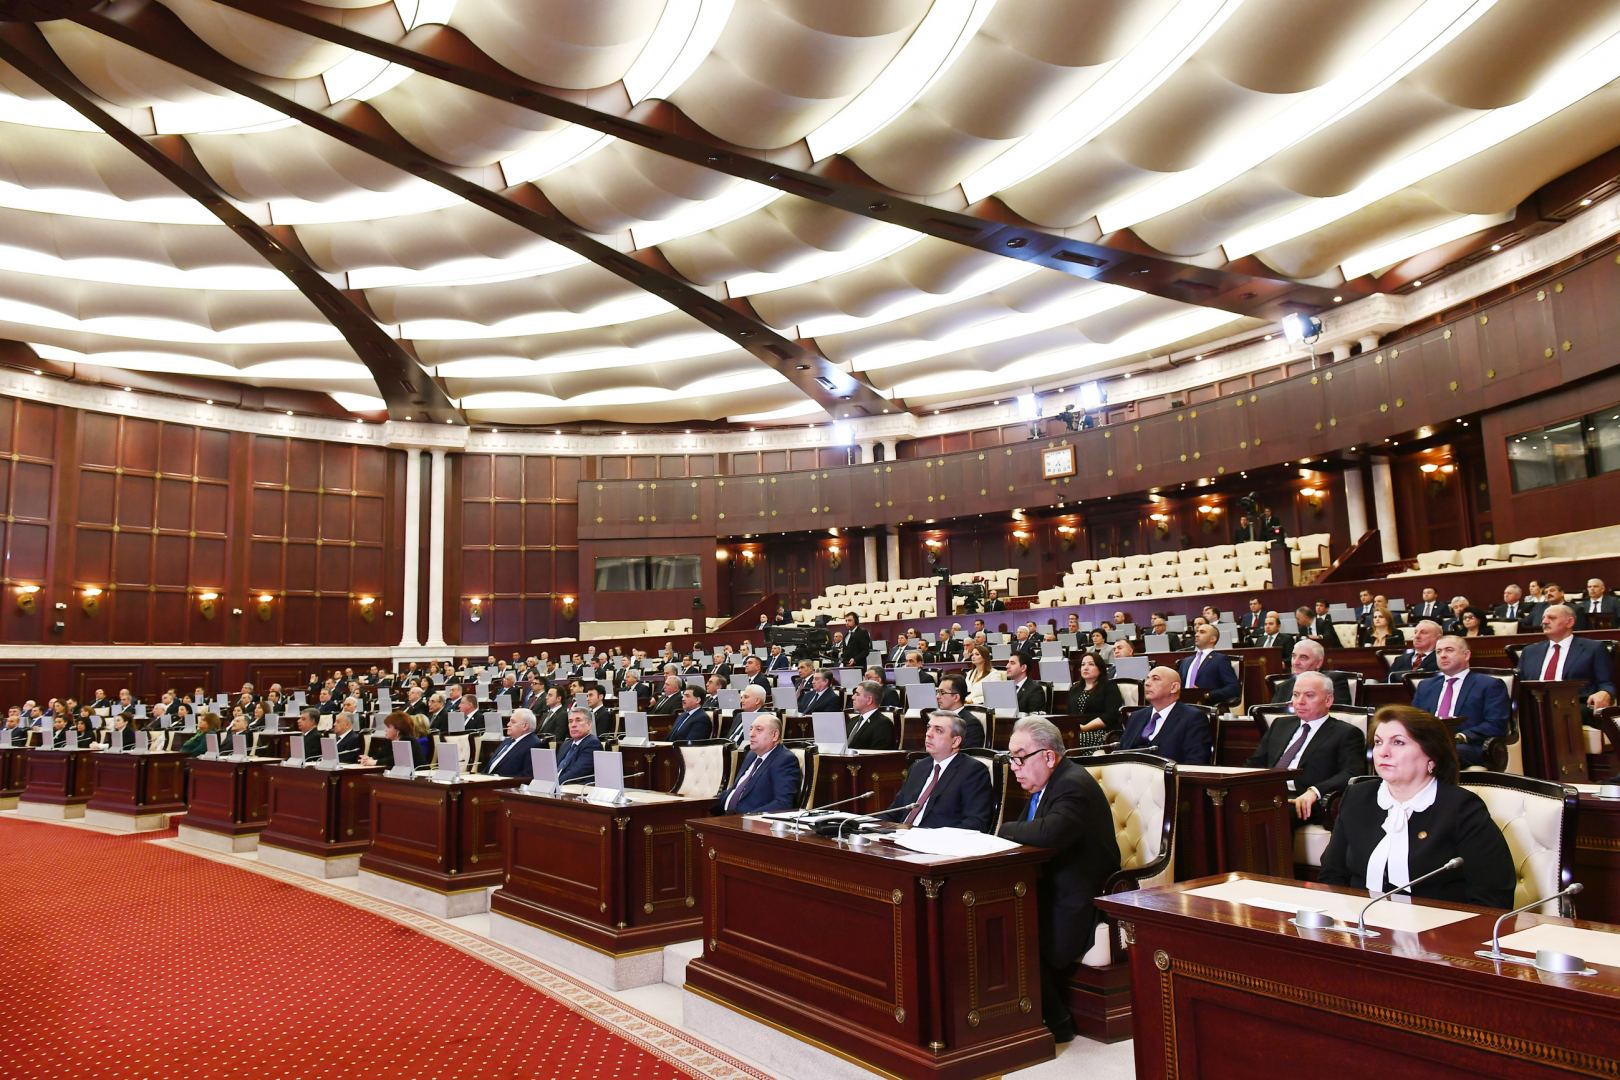 Chairpersons of parliamentary committees elected in Azerbaijan